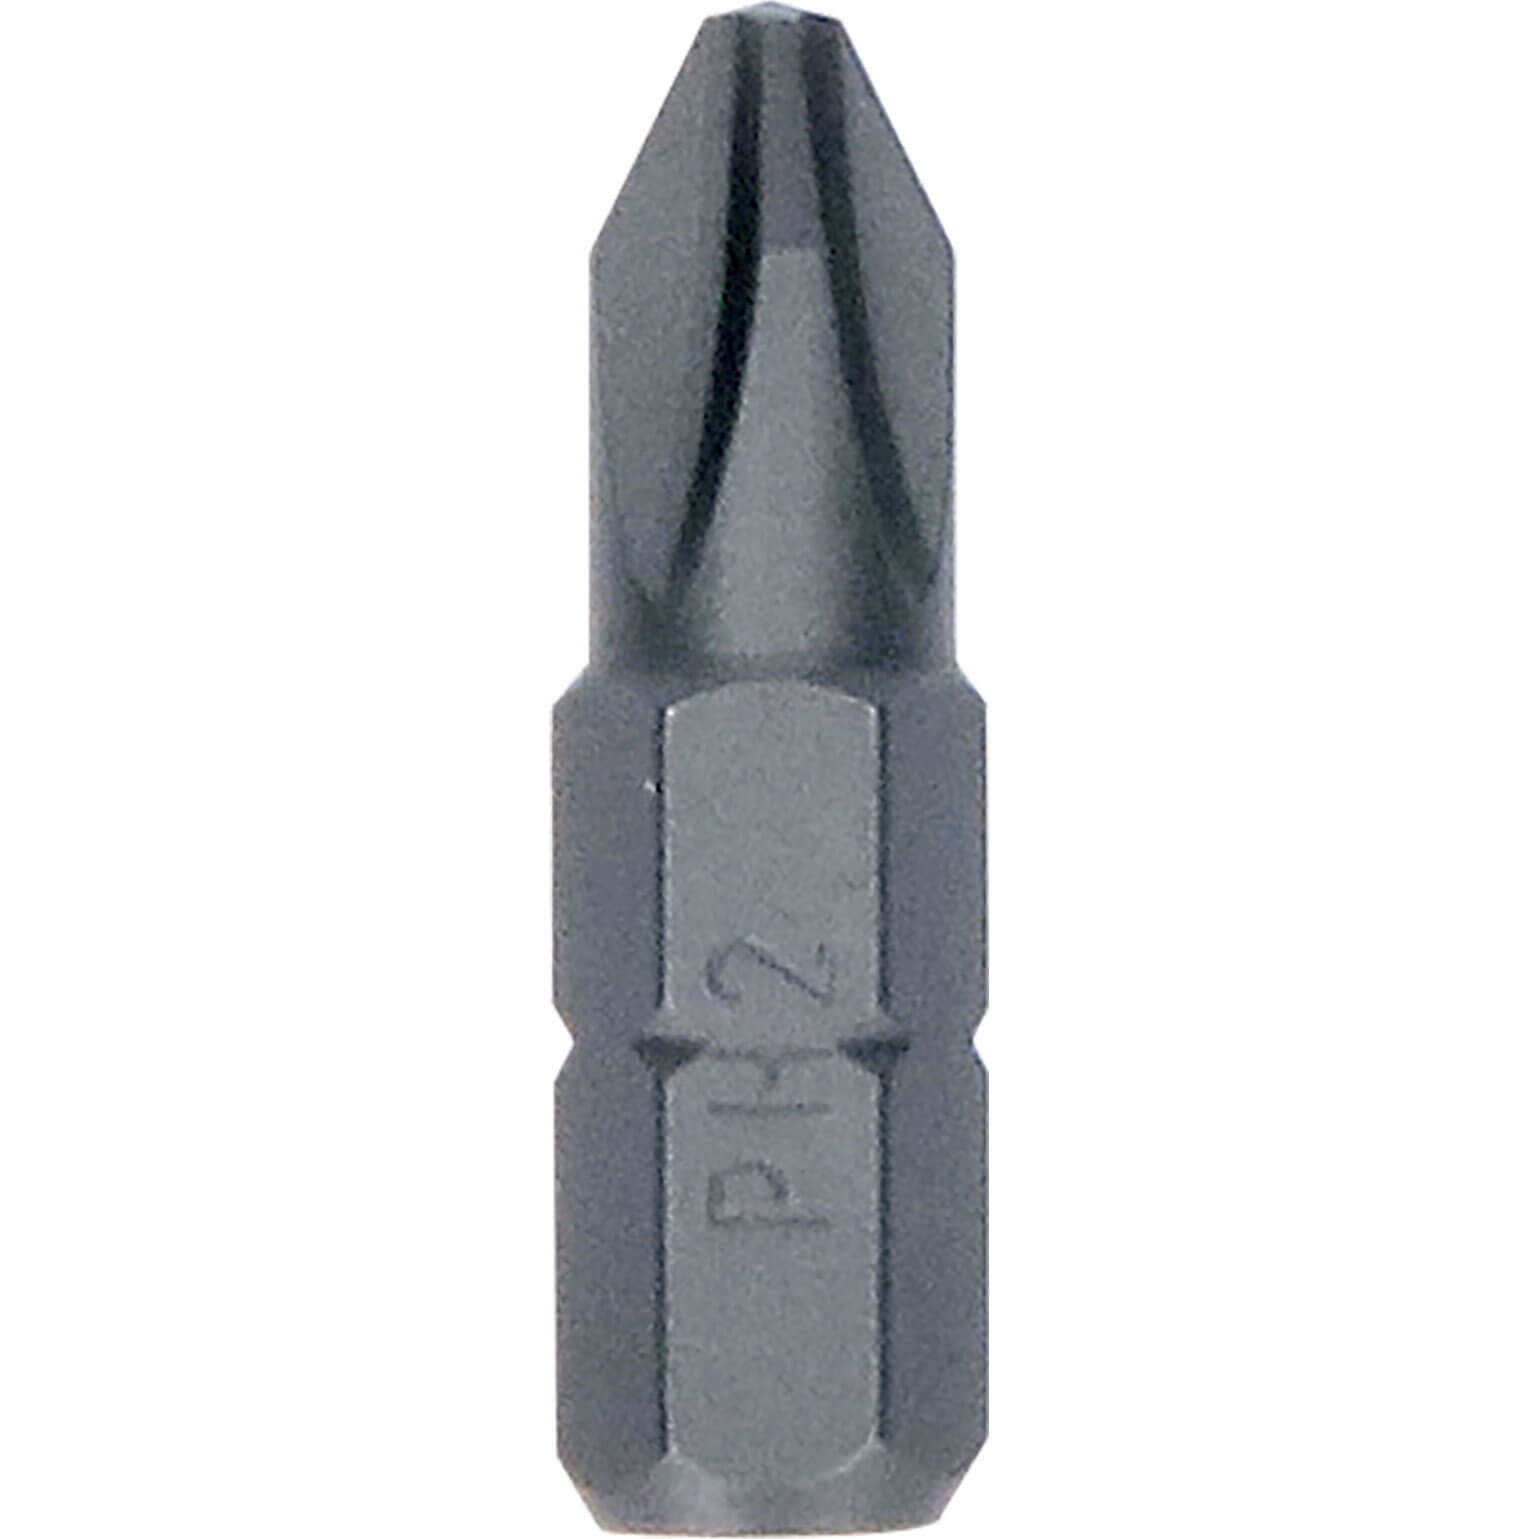 Image of Bosch Expert PH2 Tic Tac Box Extra Hard Phillips Screwdriver Bits PH2 25mm Pack of 25